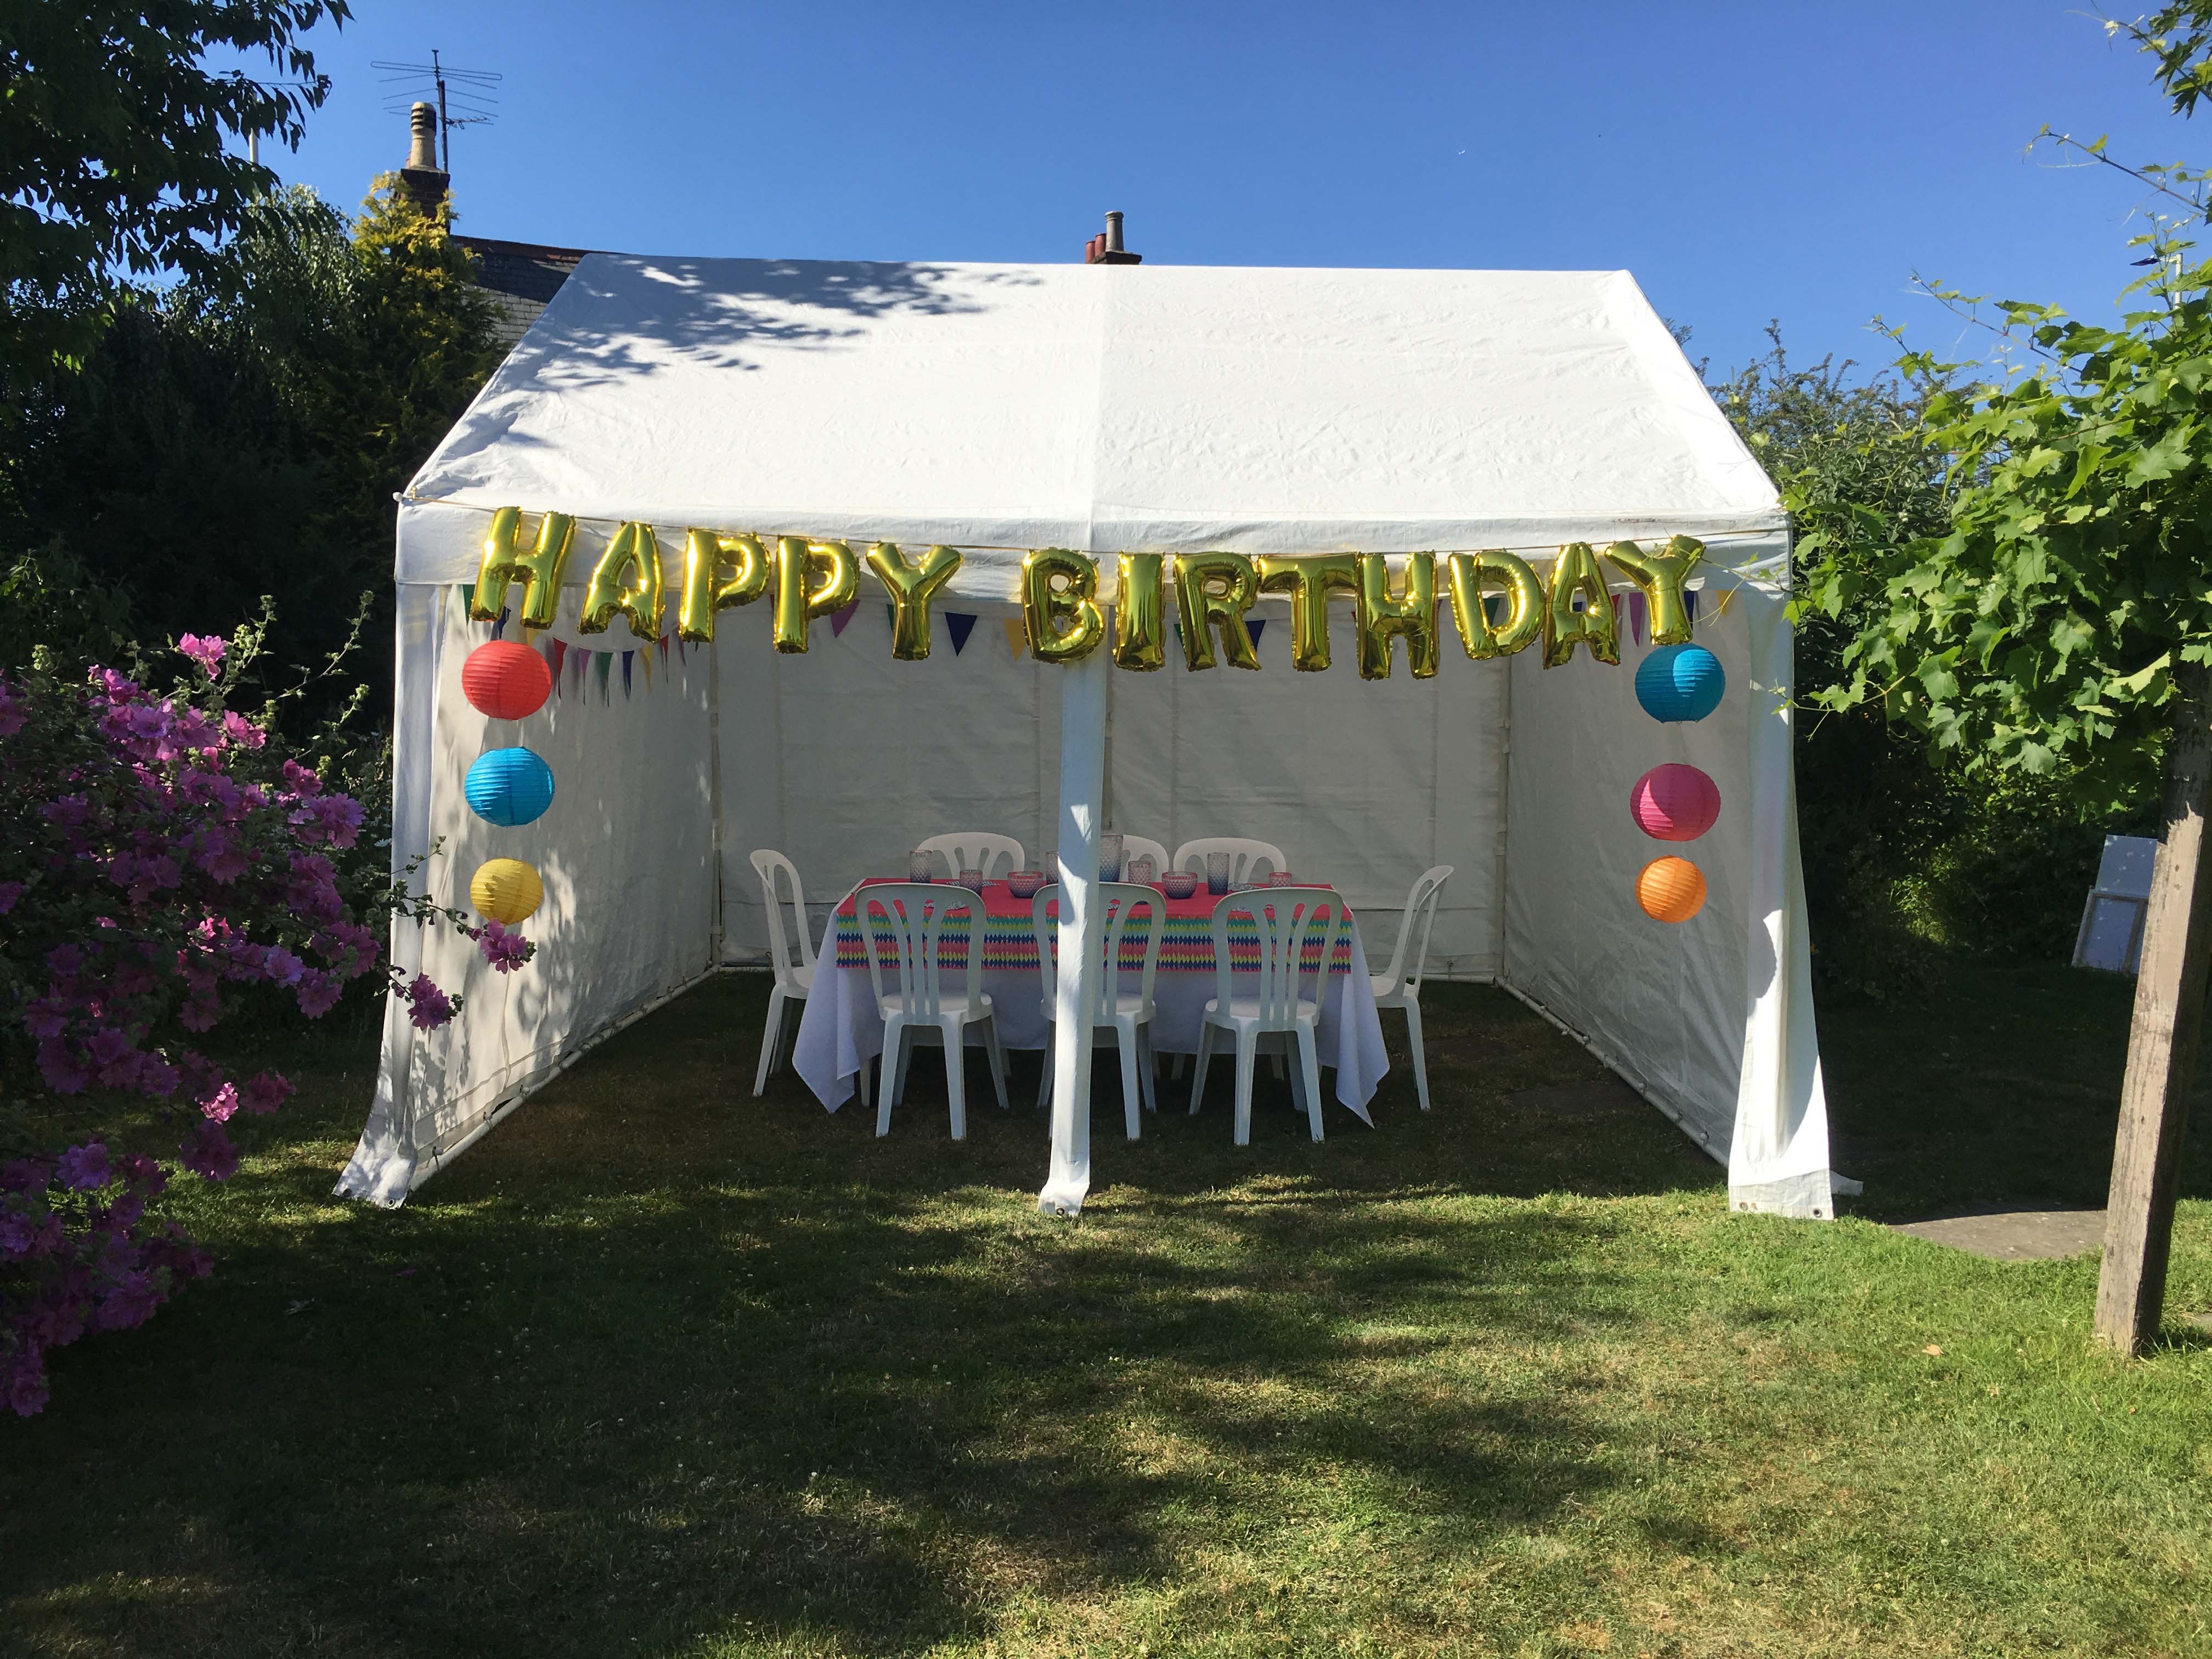 Birthday party tent 4 x 4m | Riverside Marquees - Marquee, party tents ...